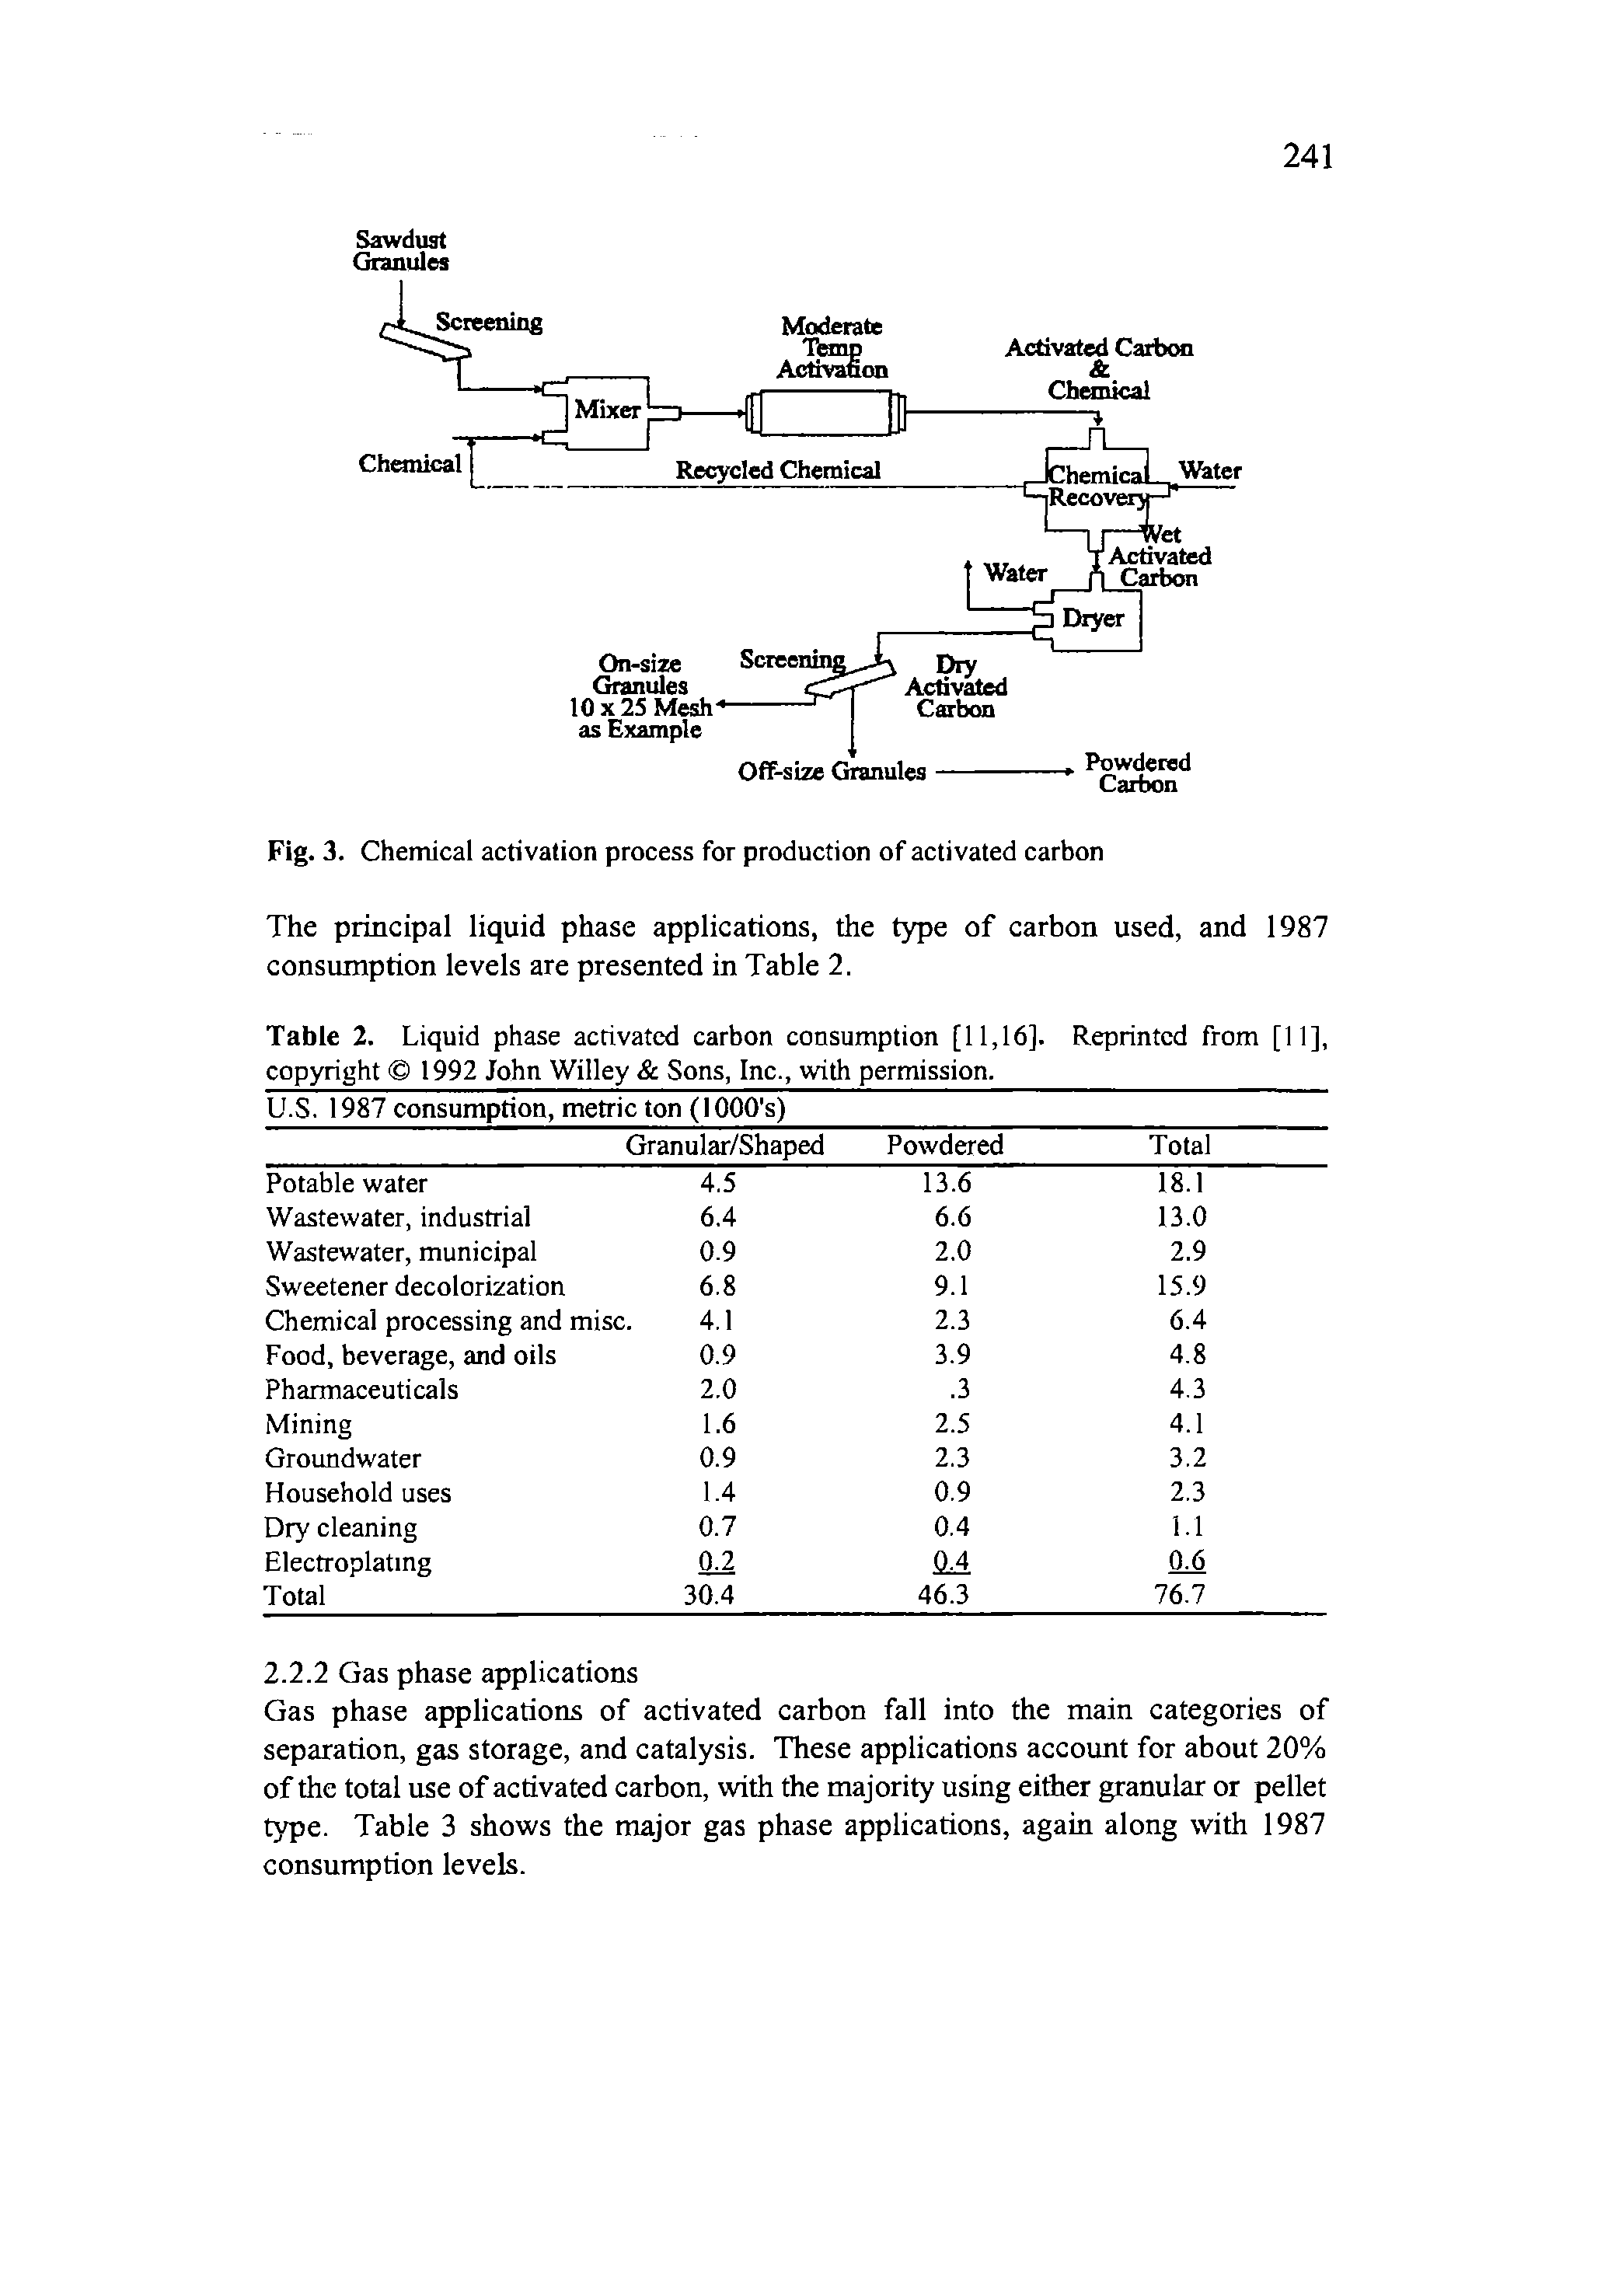 Table 2. Liquid phase activated carbon consumption [11,16]. copyright 1992 John Willey Sons, Inc., with permission.